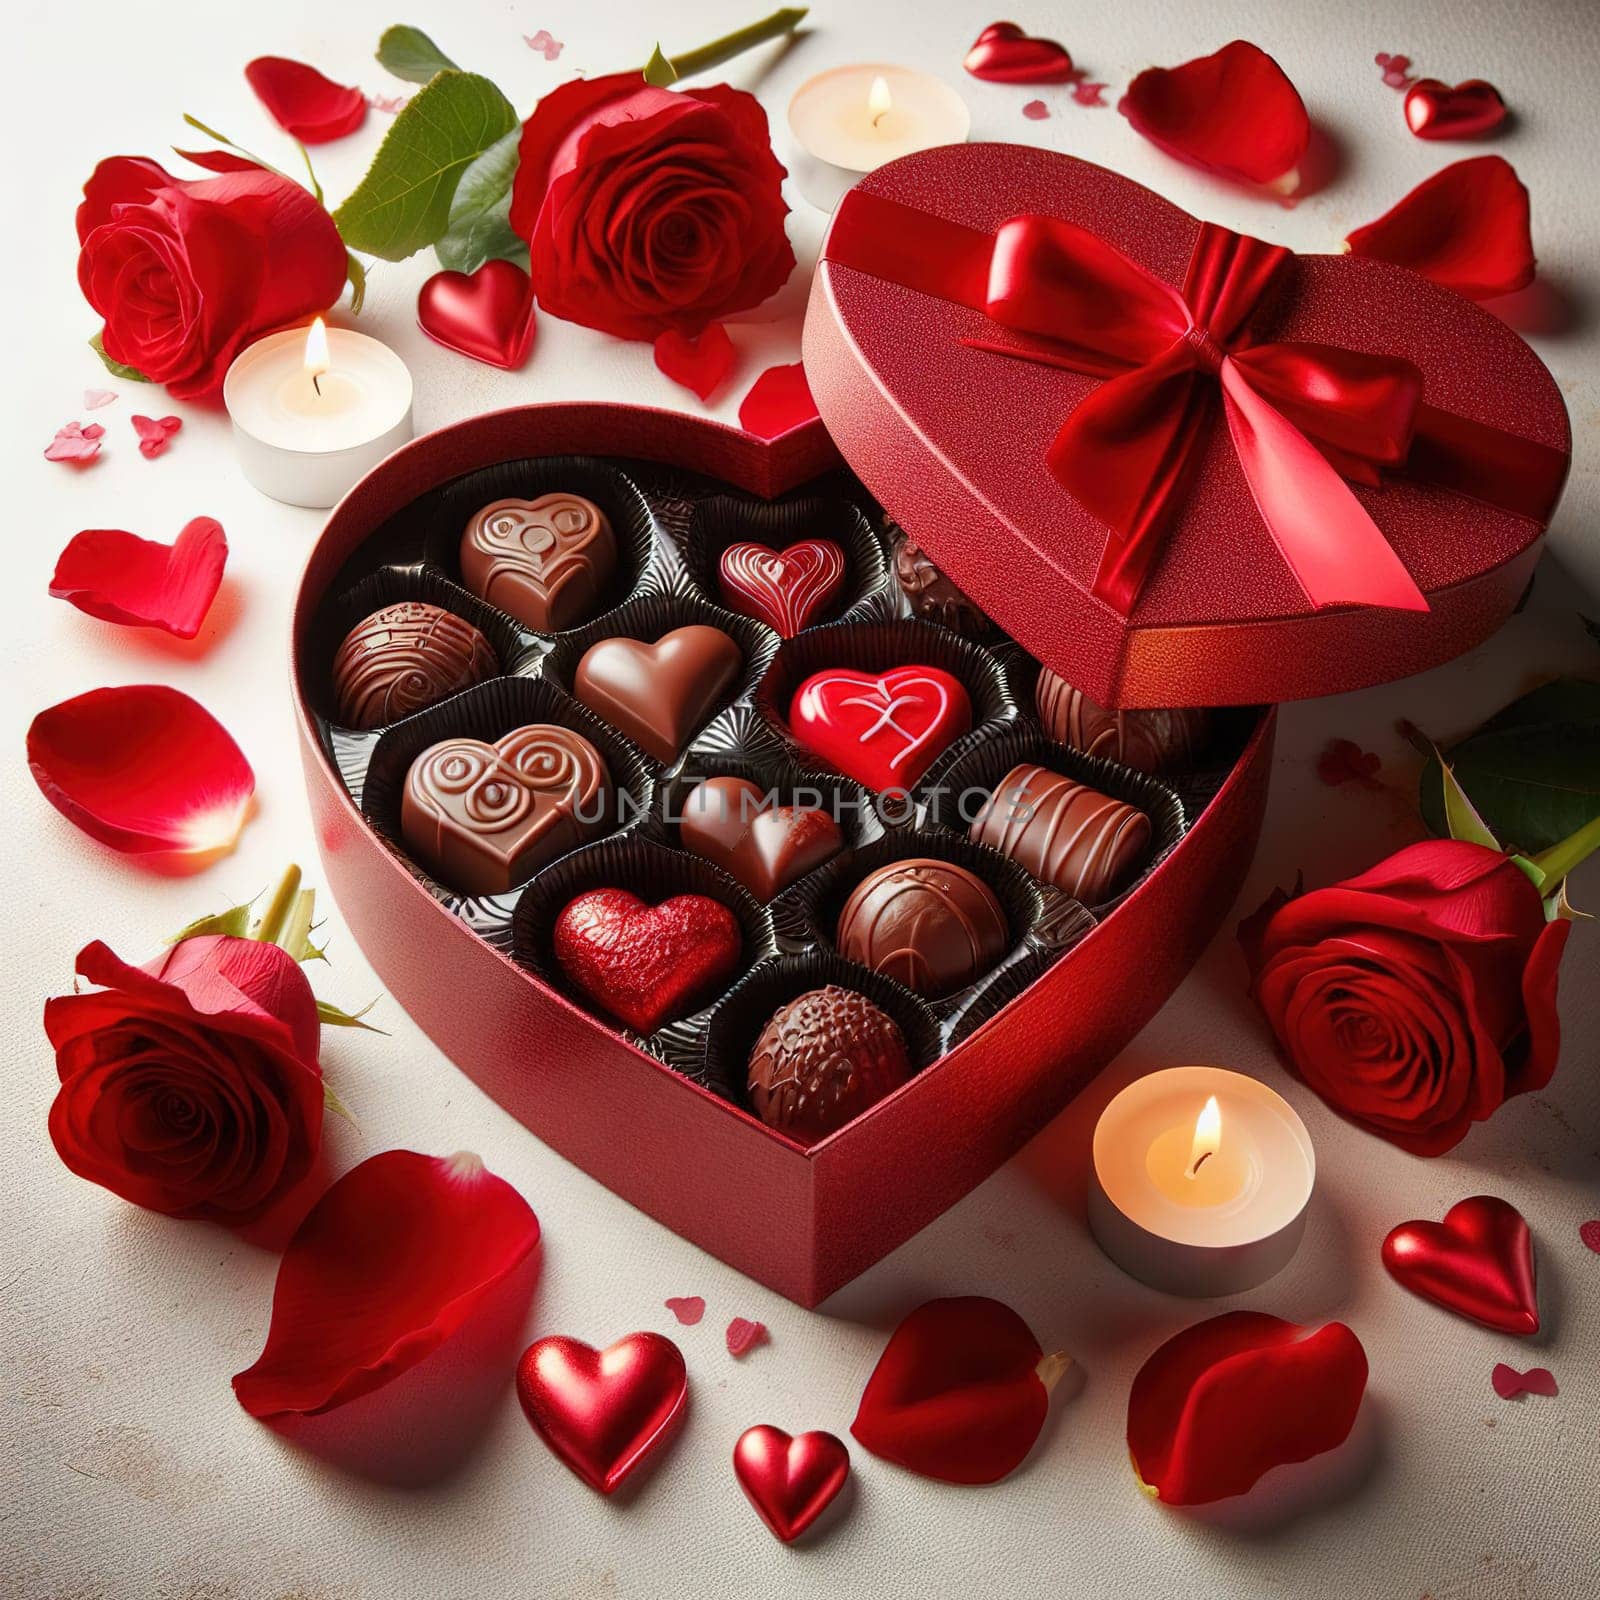 Chocolate candies in the shape of a heart. High quality illustration